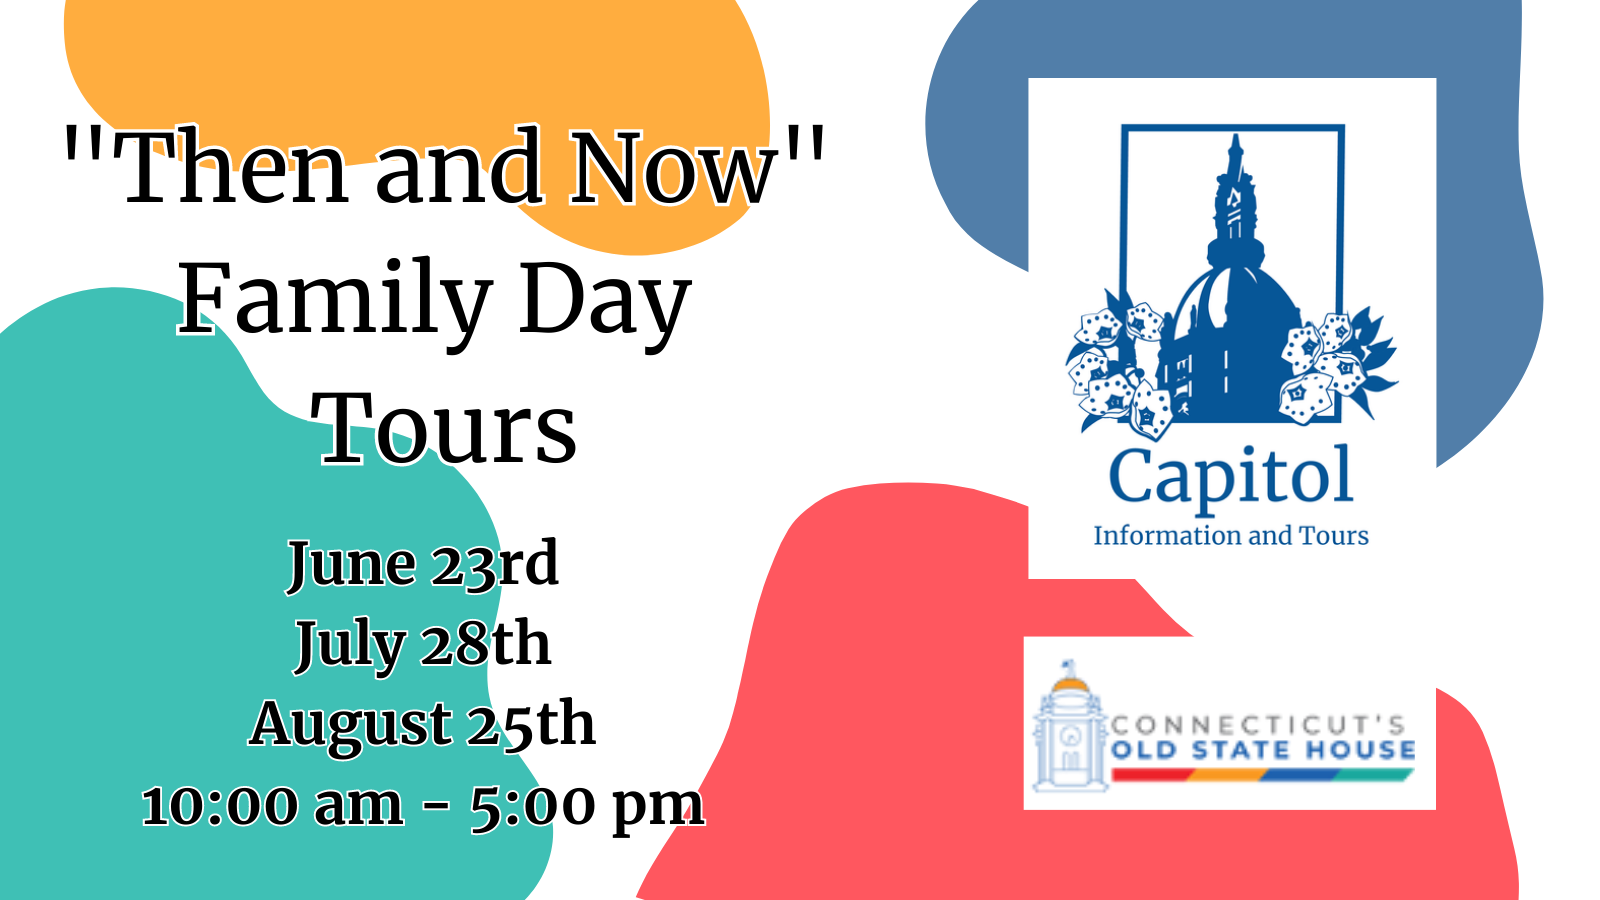 family day details image